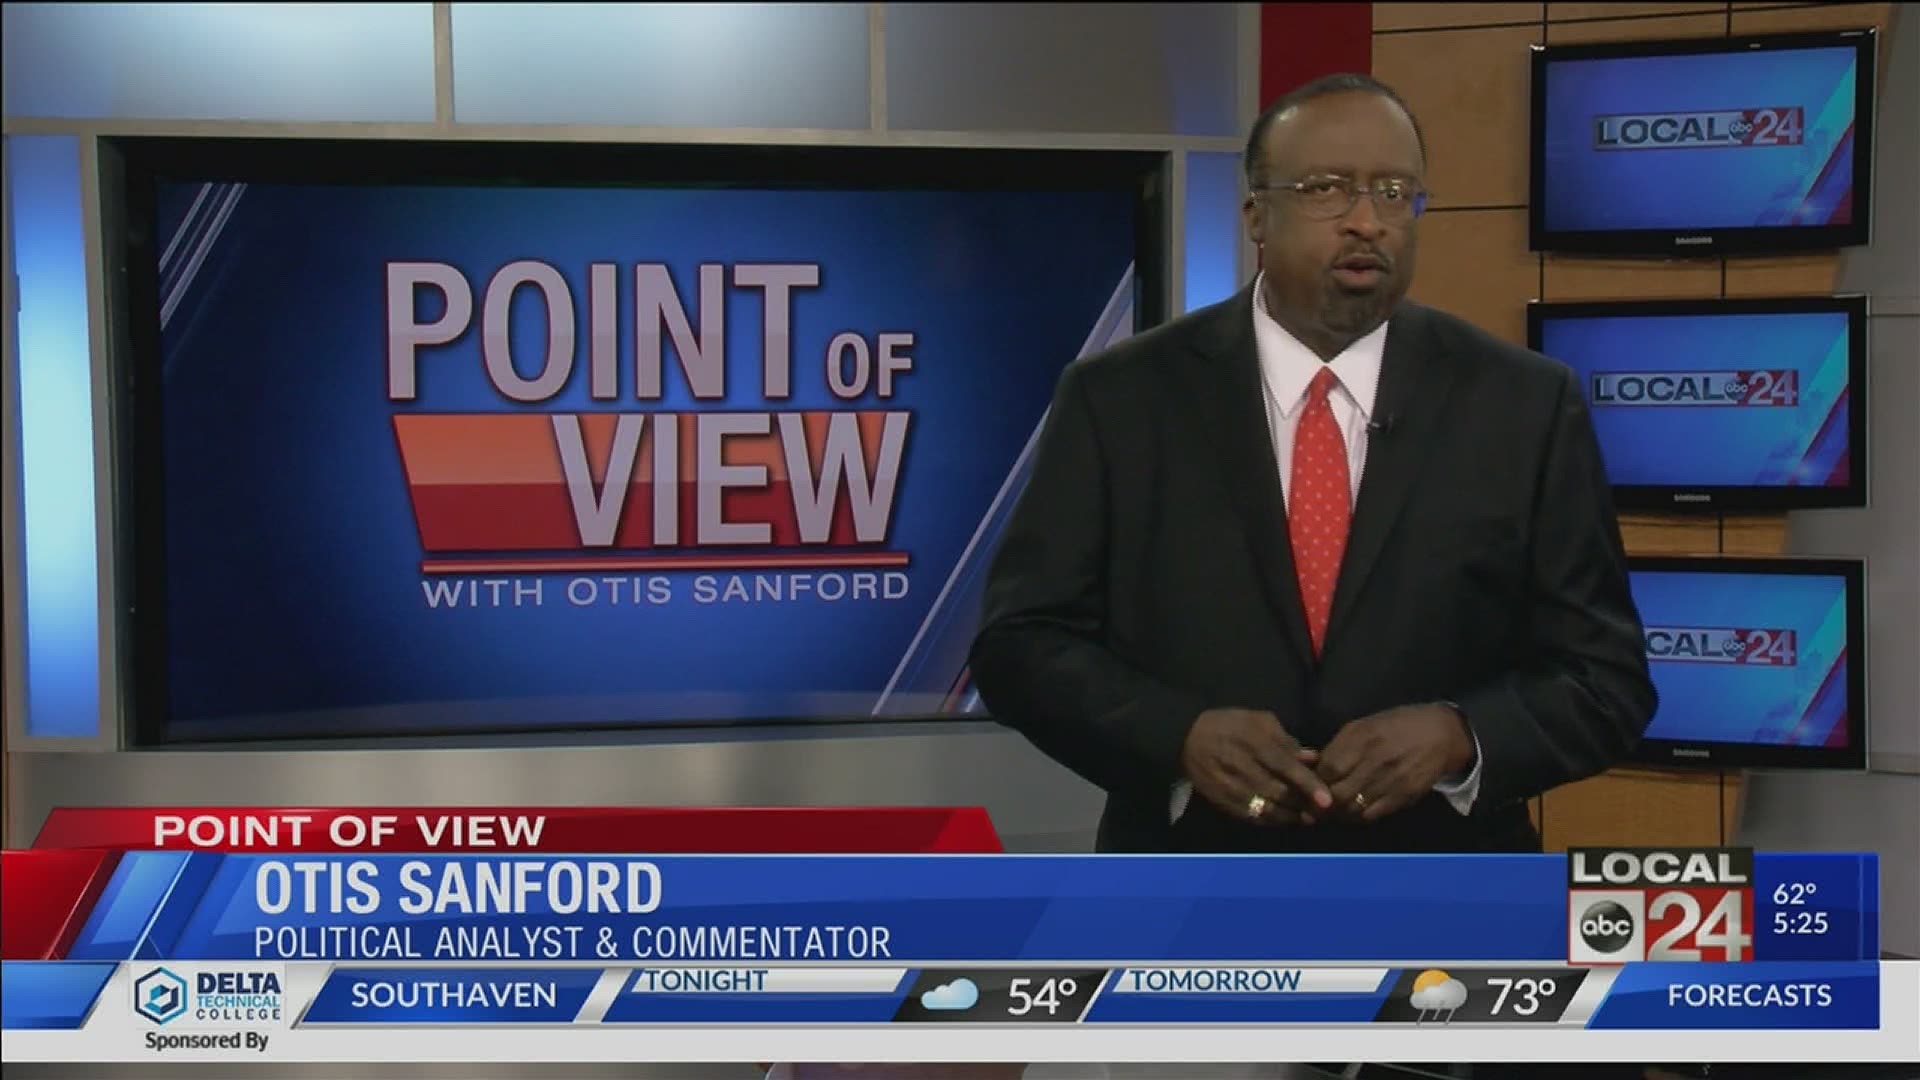 Local 24 News political analyst and commentator Otis Sanford shares his point of view on new voting machines for Shelby County amid COVID-19 concerns.